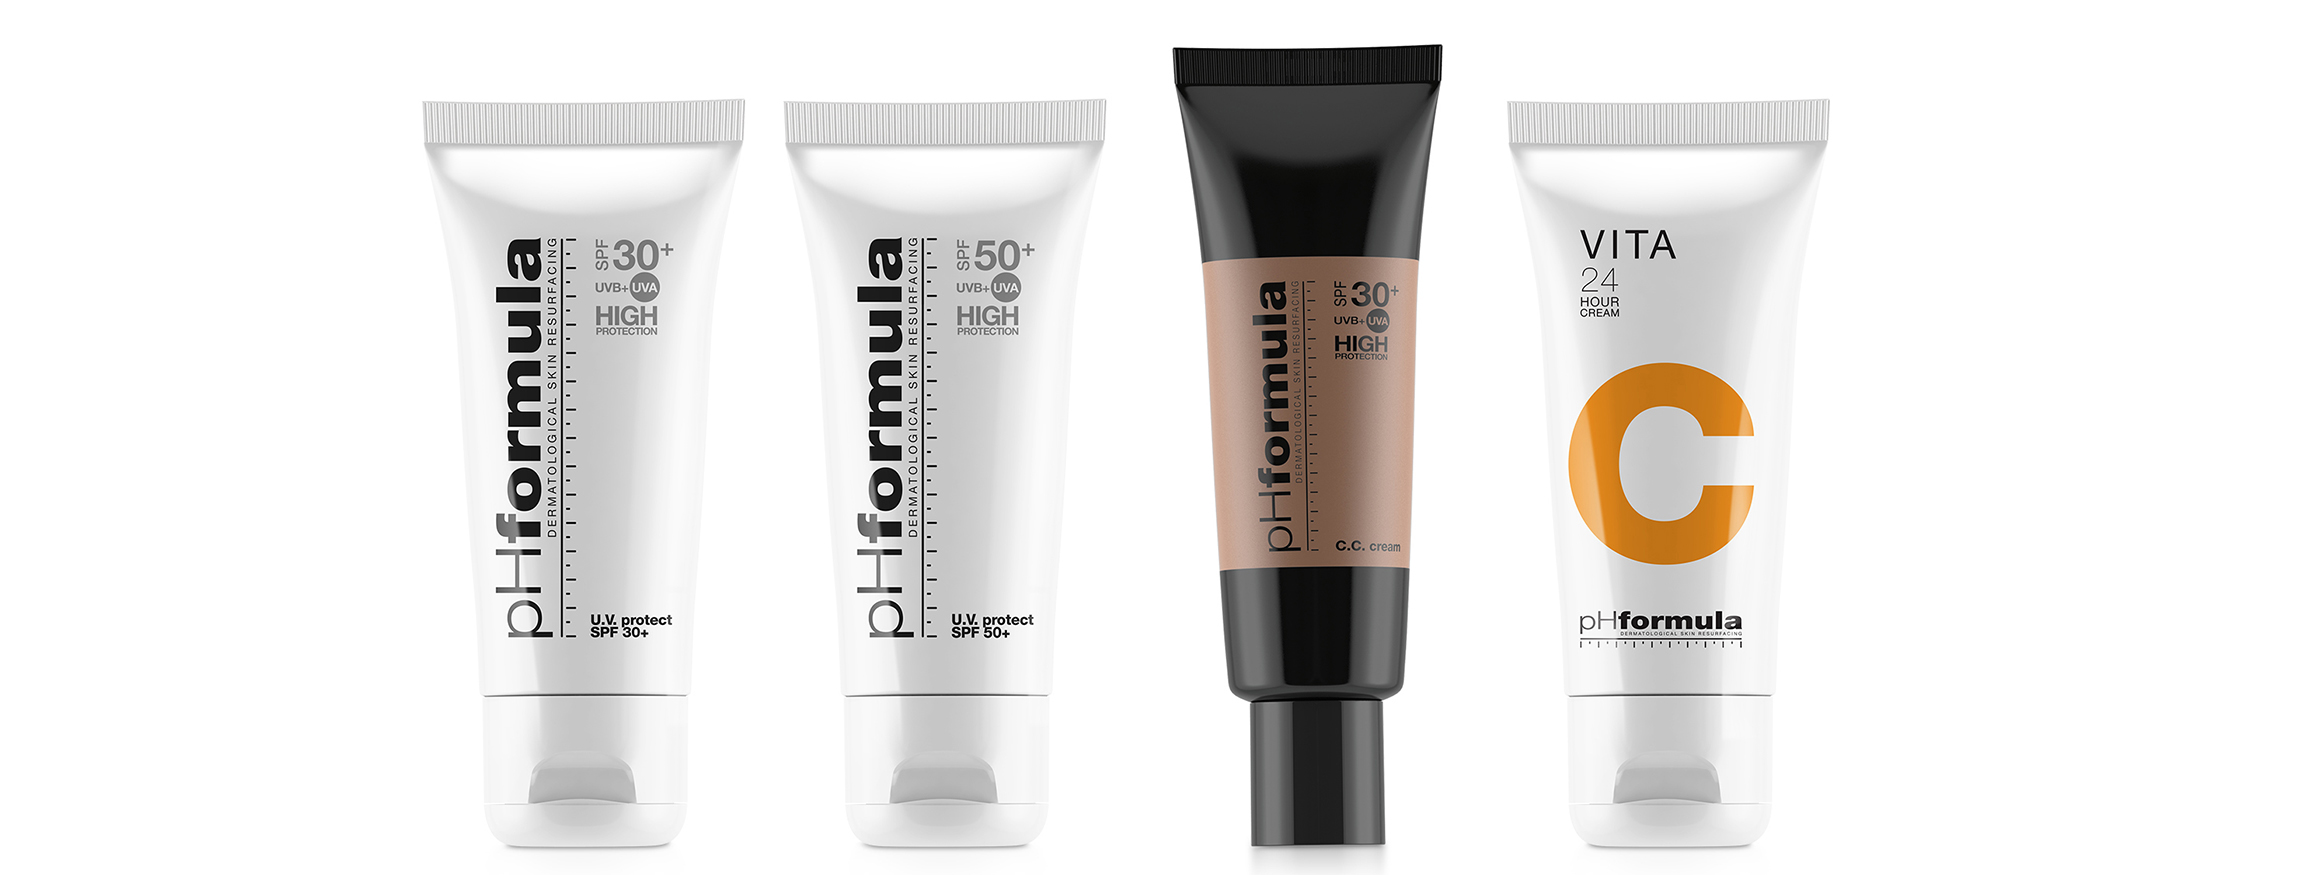 The benefits of pHformula’s specifically formulated product range